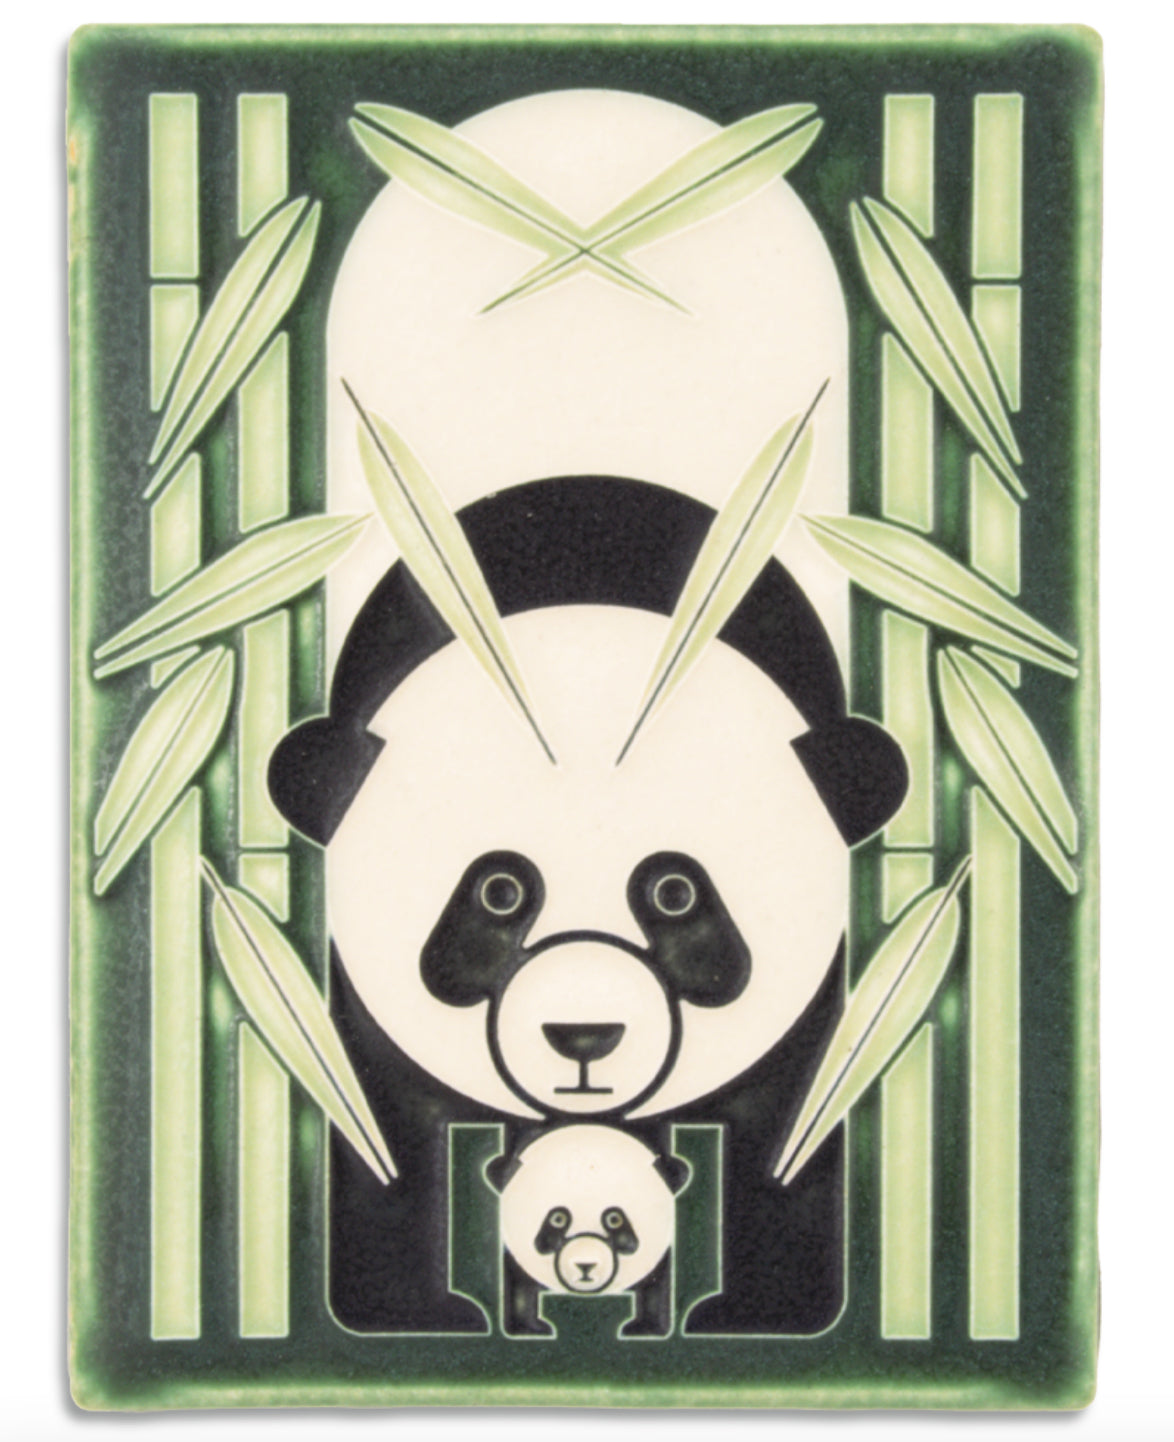 6x8 Panda Panda is based on a T-shirt design (and later a print) by Charley Harper. This sweet homage to panda parenthood is part of our extensive Charley Harper by Motawi line.